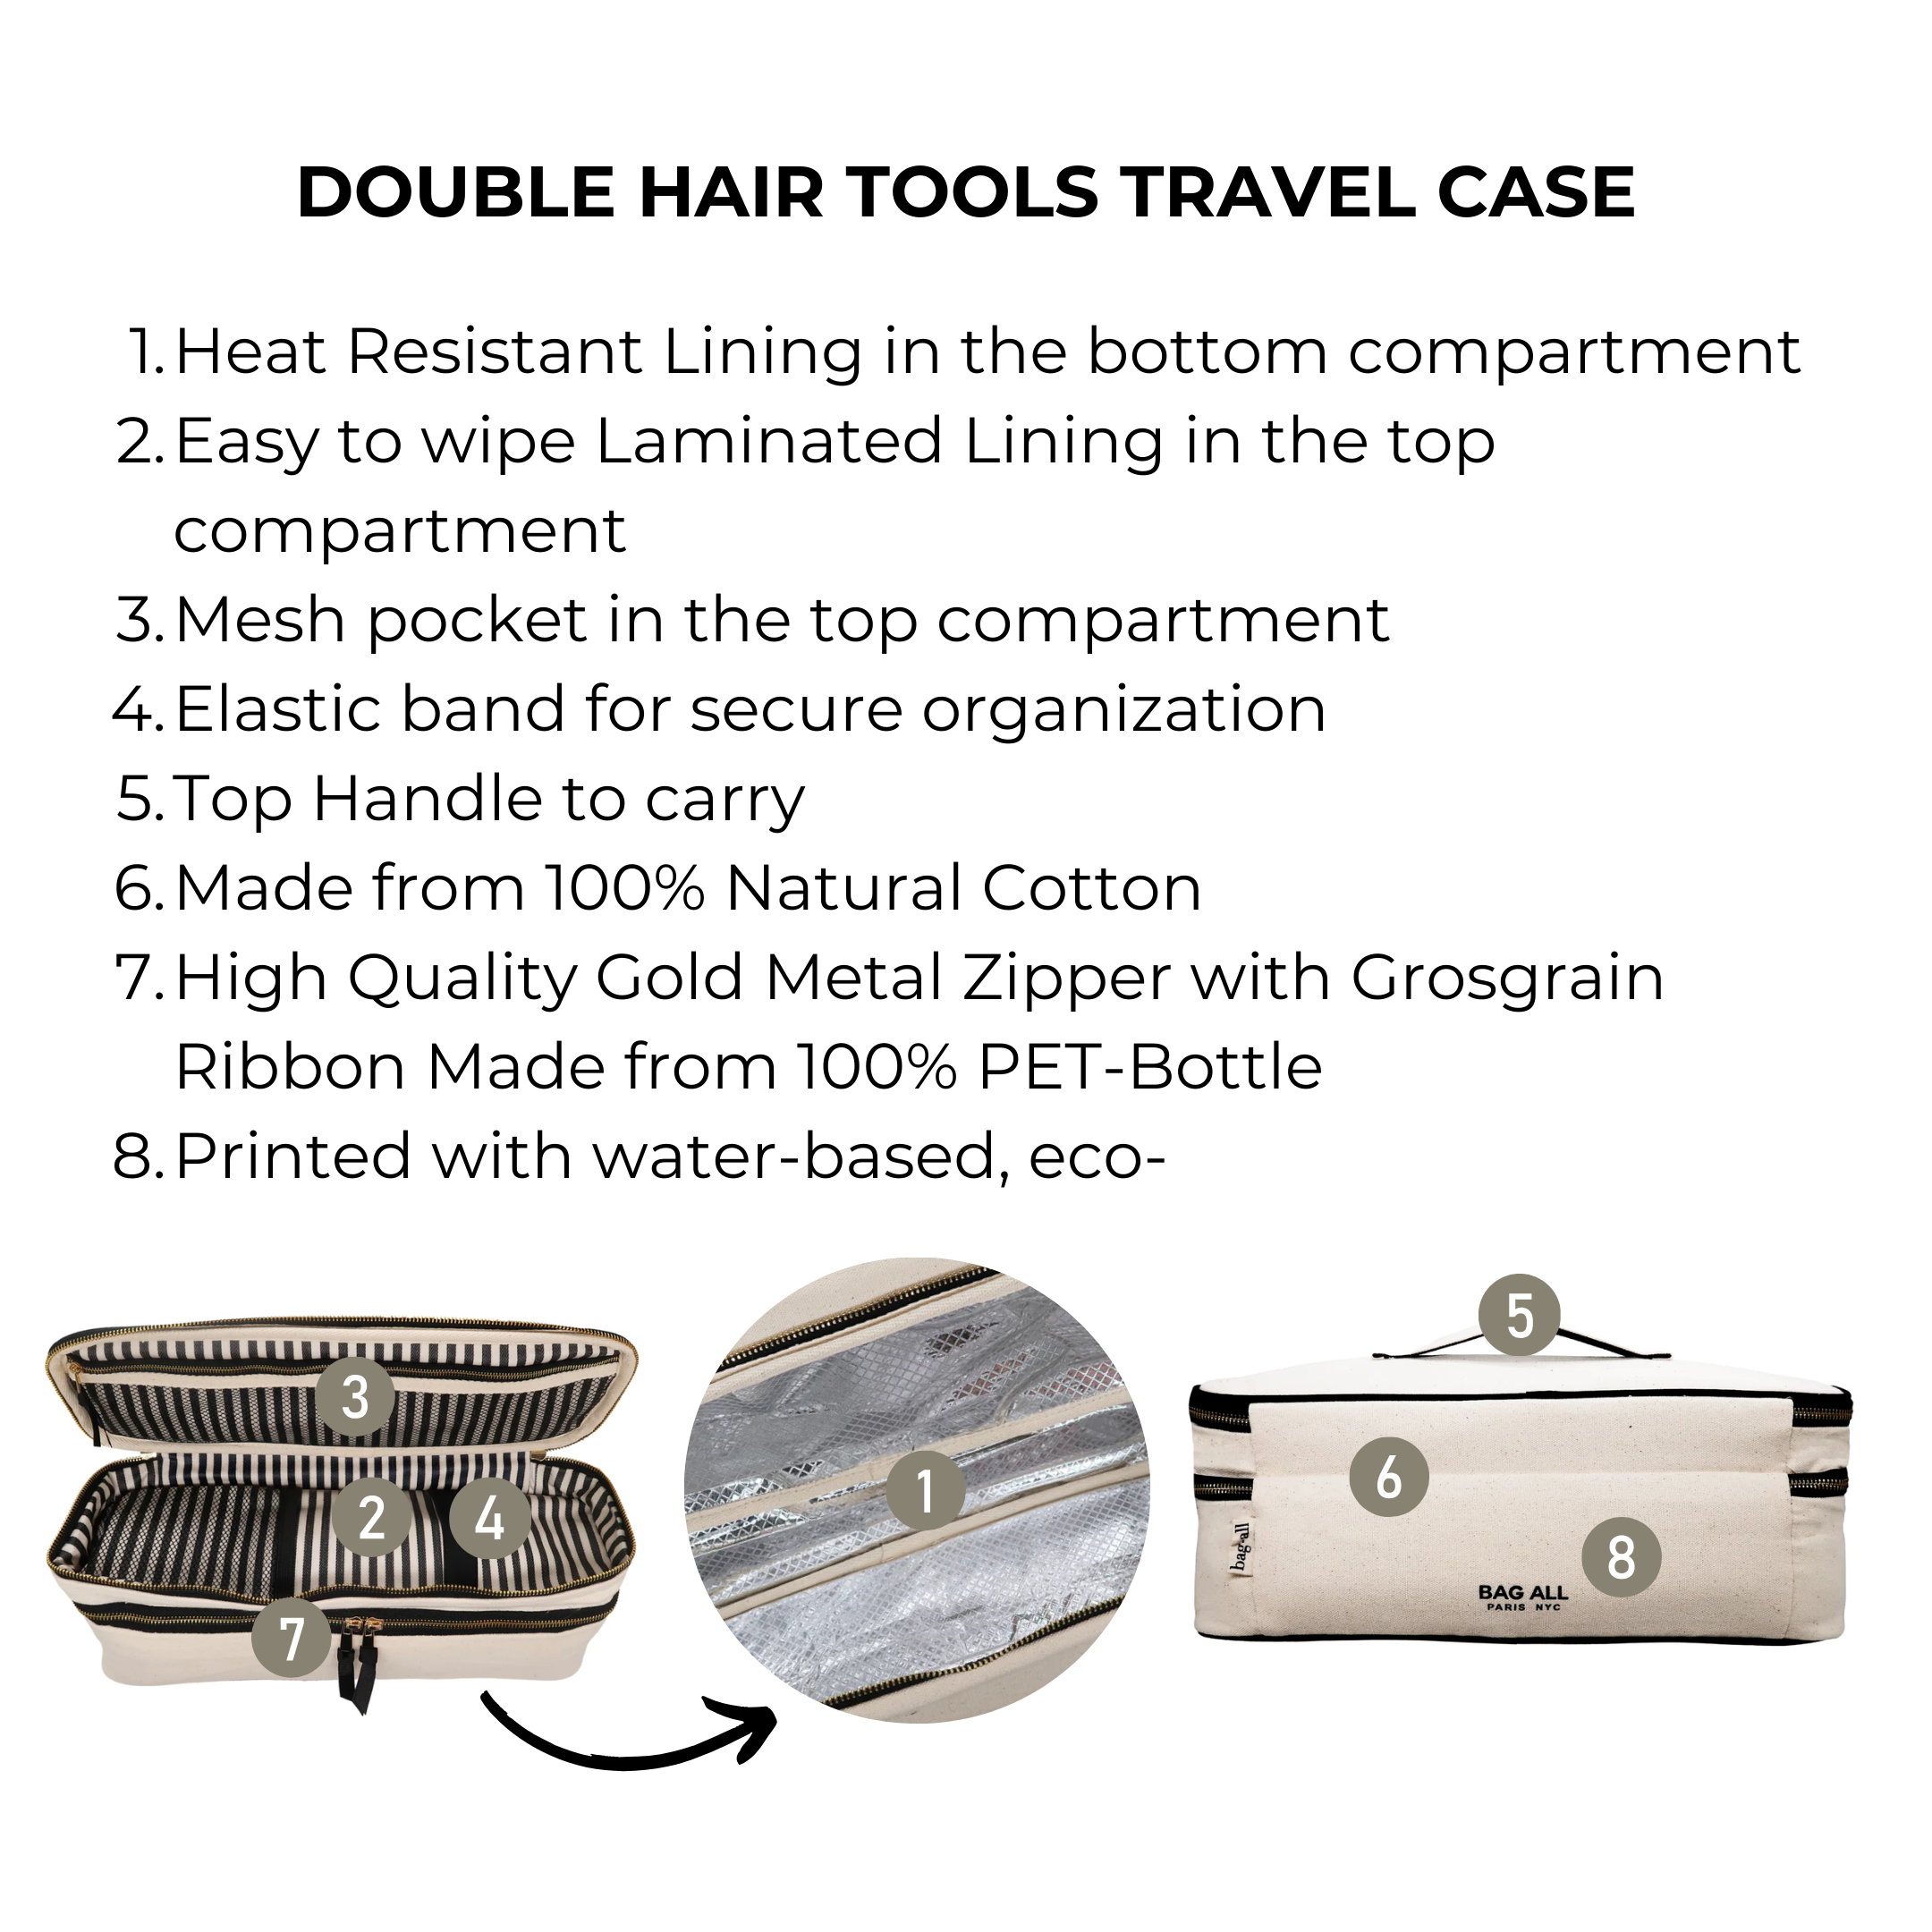 Double Hair Tools Travel Case, Cream | Bag-all